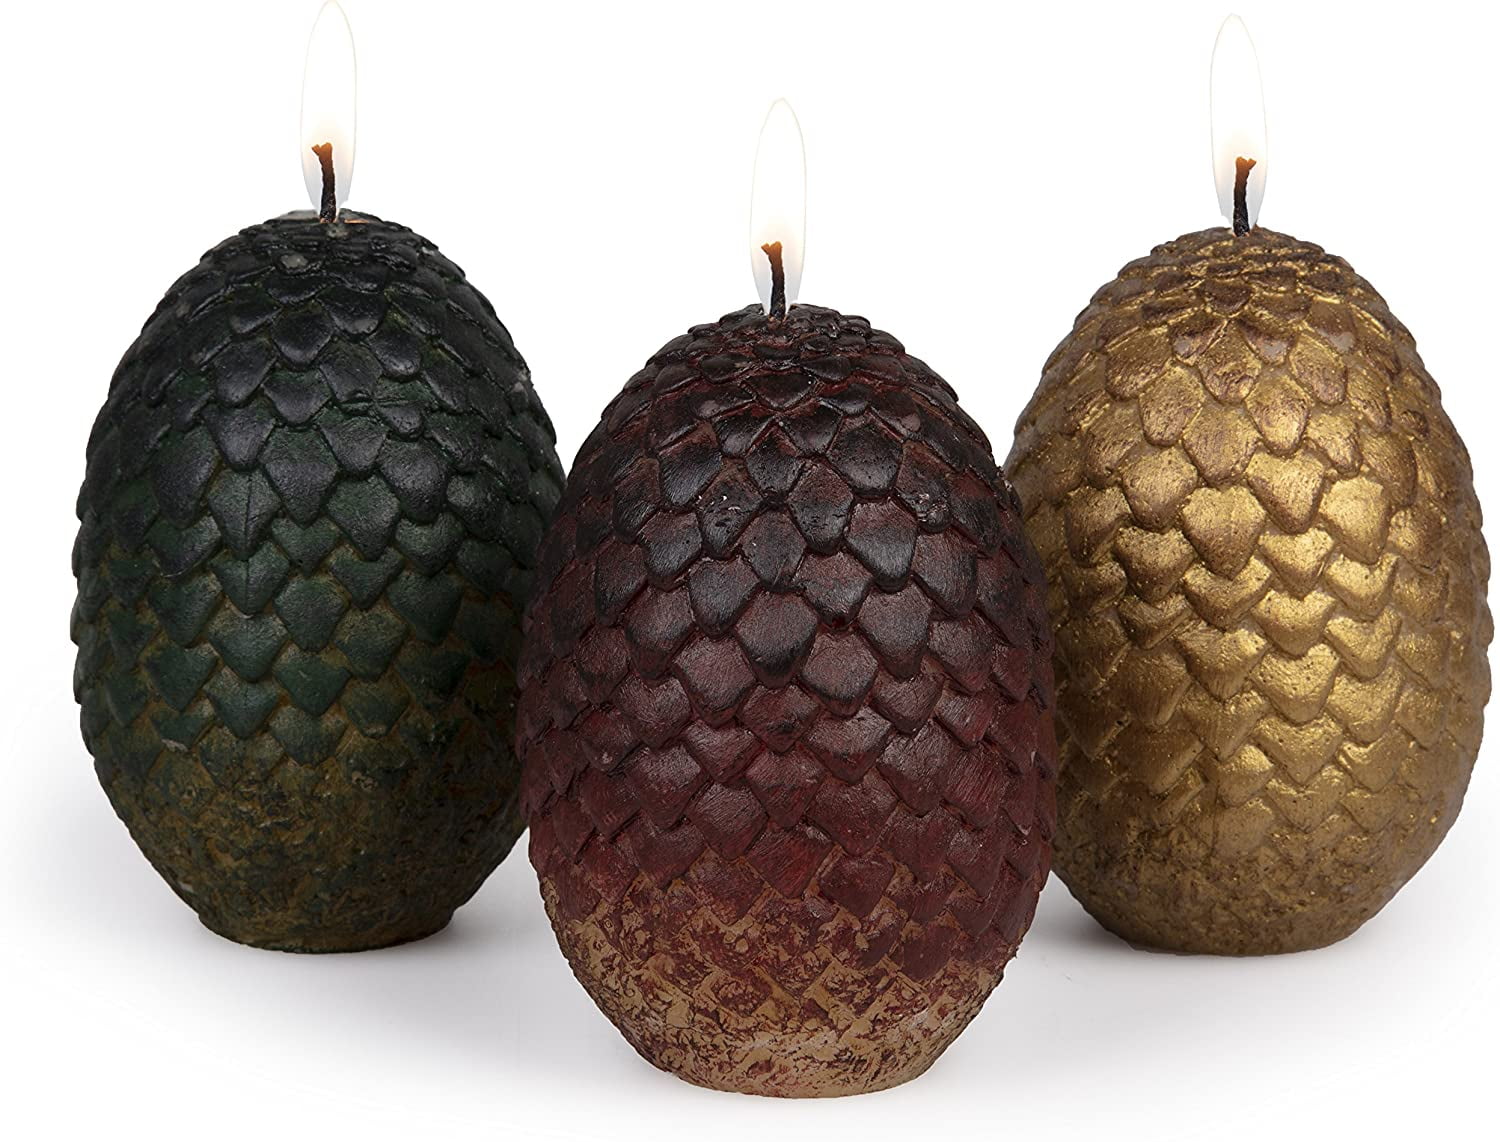 Game of Thrones Sculpted Dragon Egg Candles, Set of 3 - Great Gift for GoT and House of The Dragon Fans - 2 1/2" Each Replicas